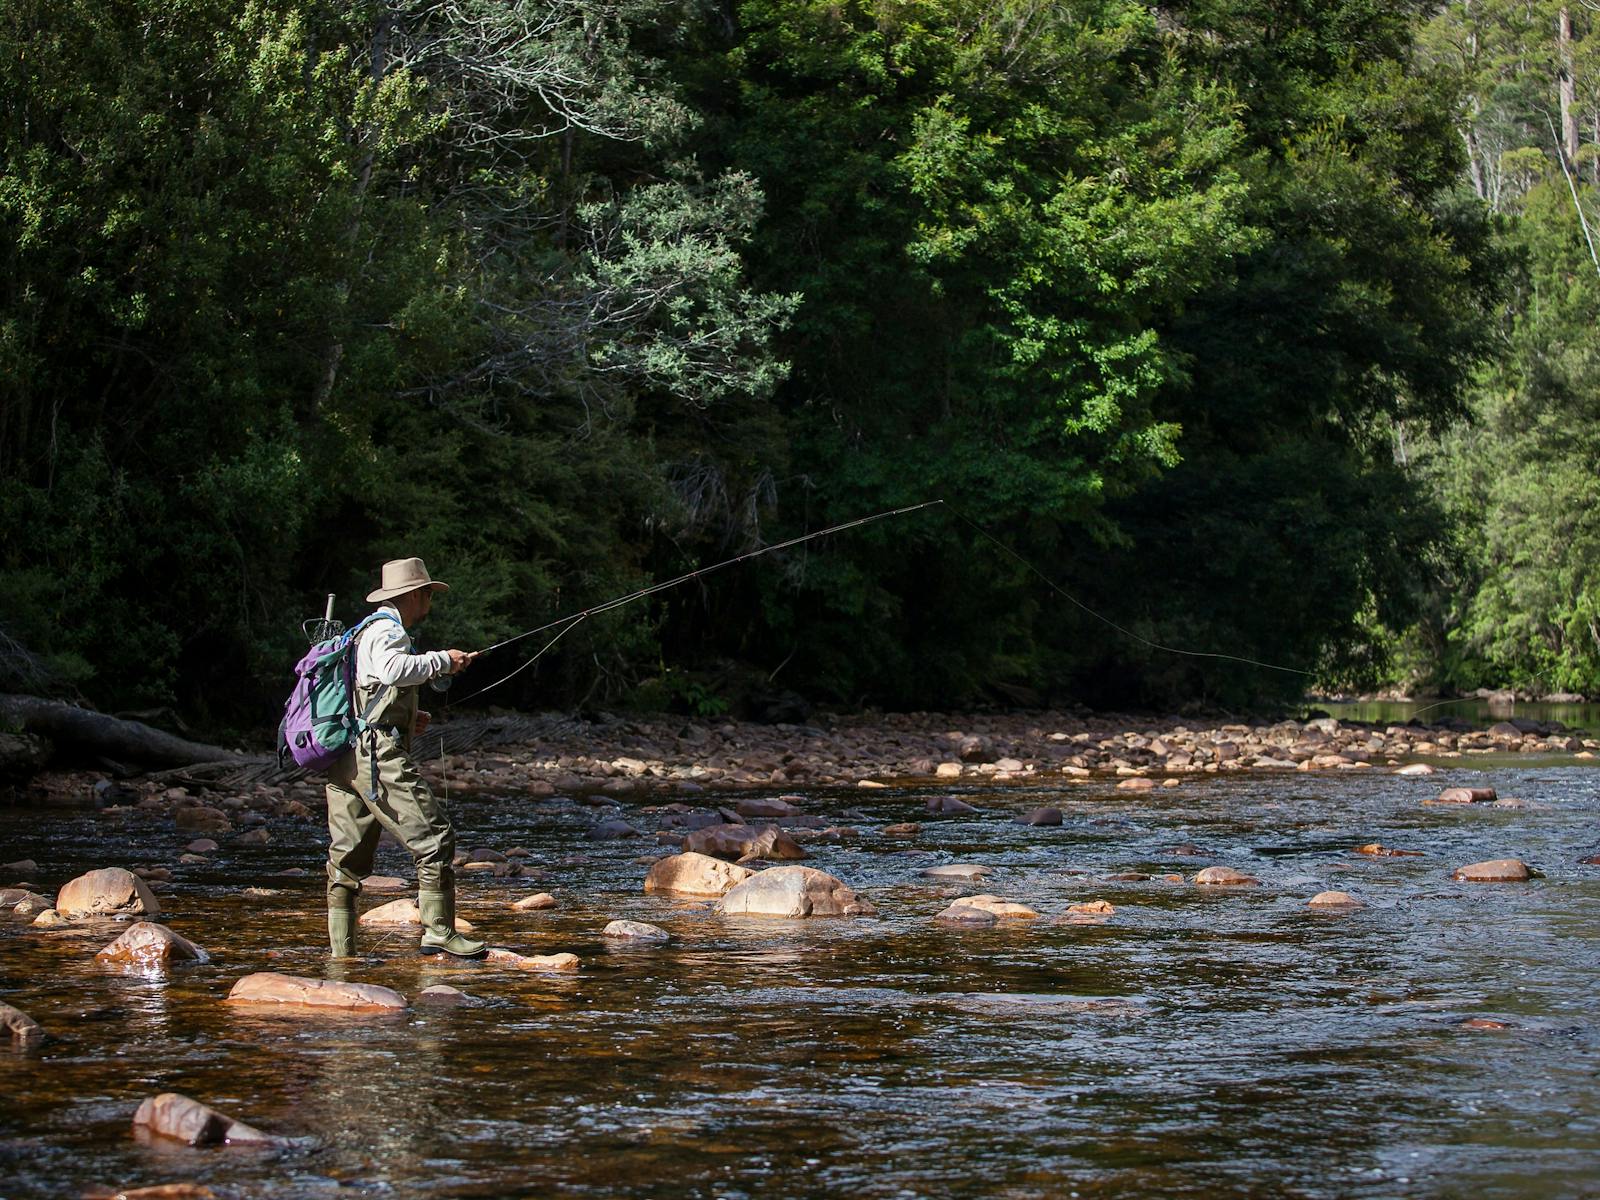 Fishing in Kentish, Outdoor and adventure